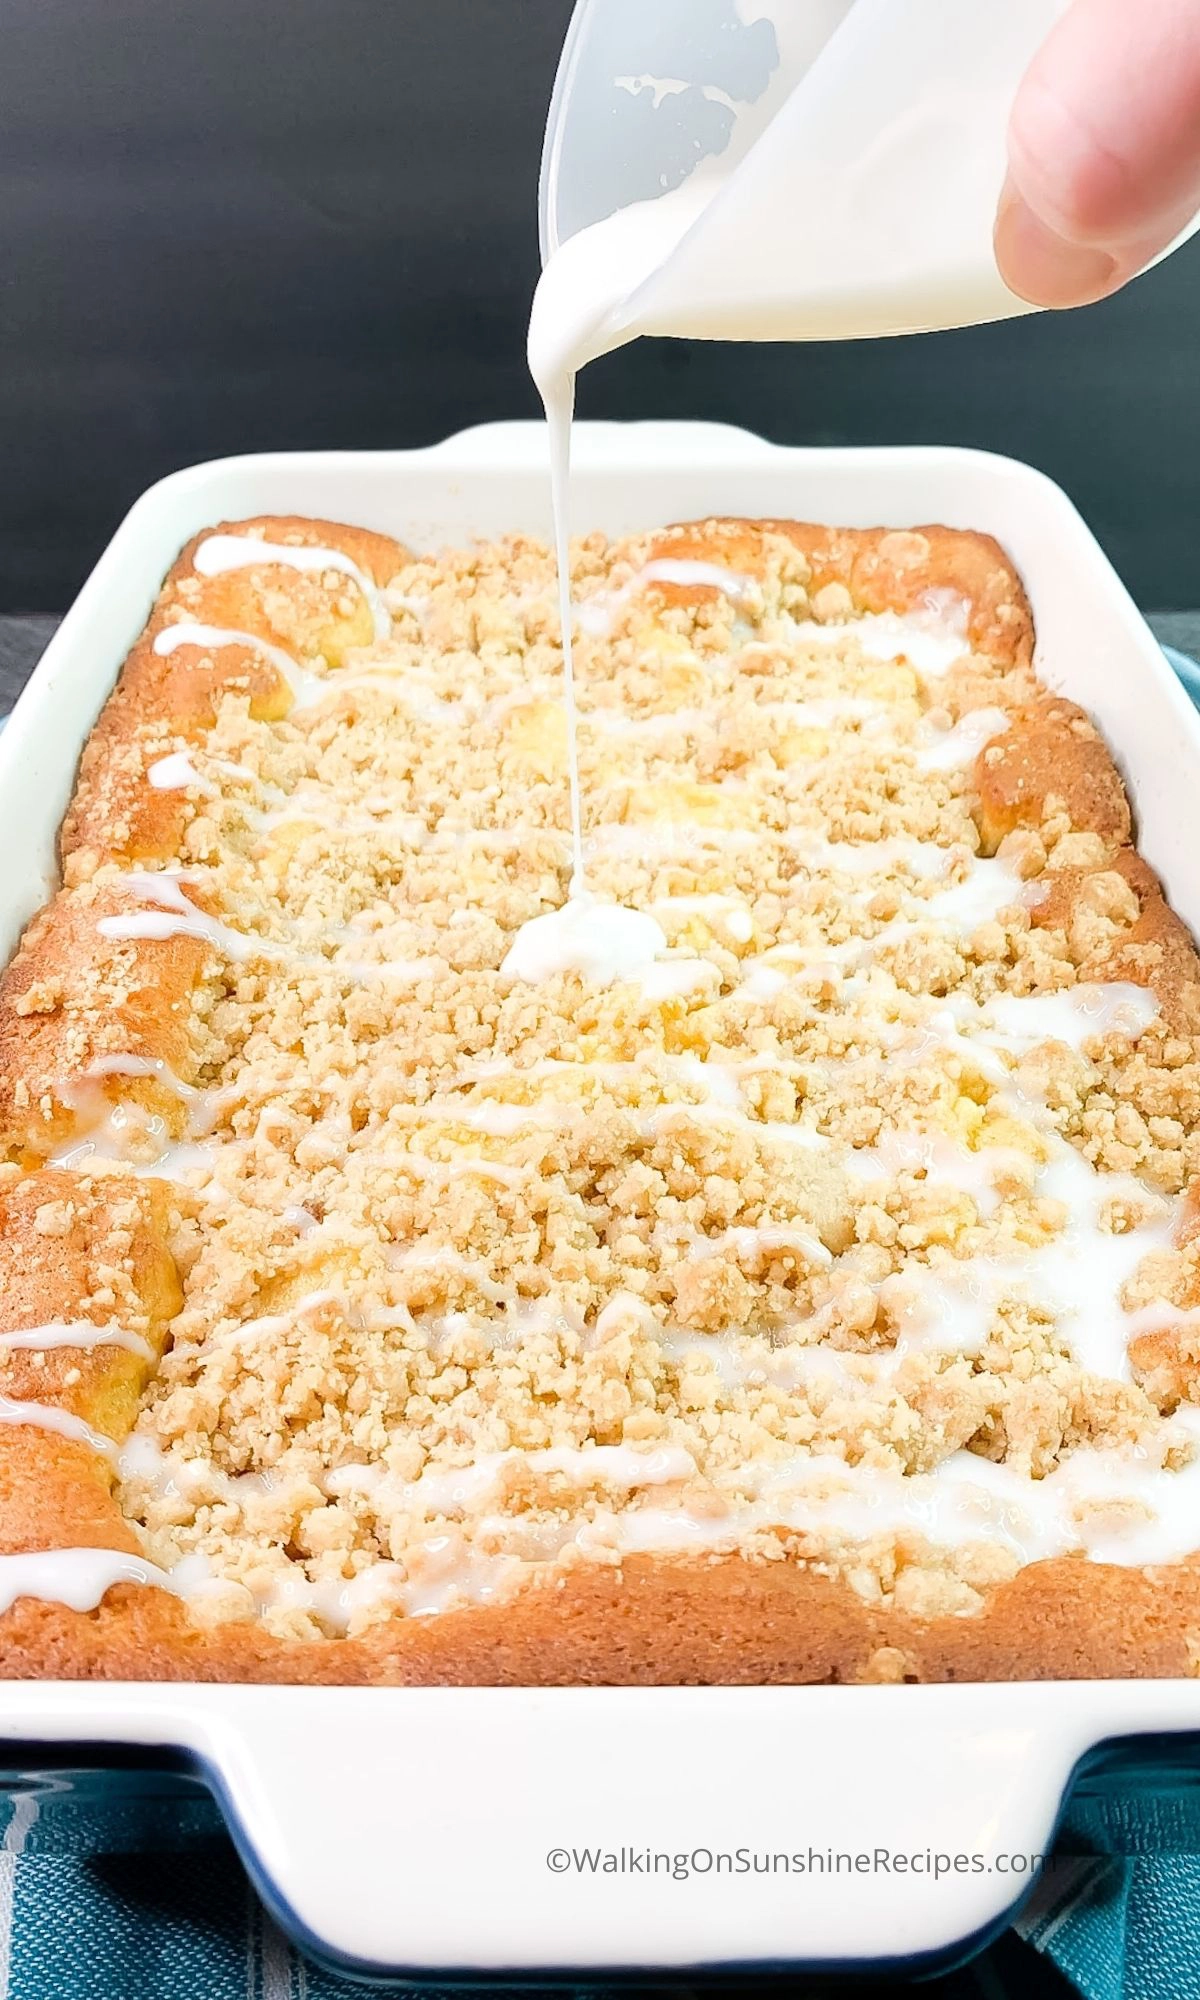 Pour glaze on top of baked peach crumb cake. 